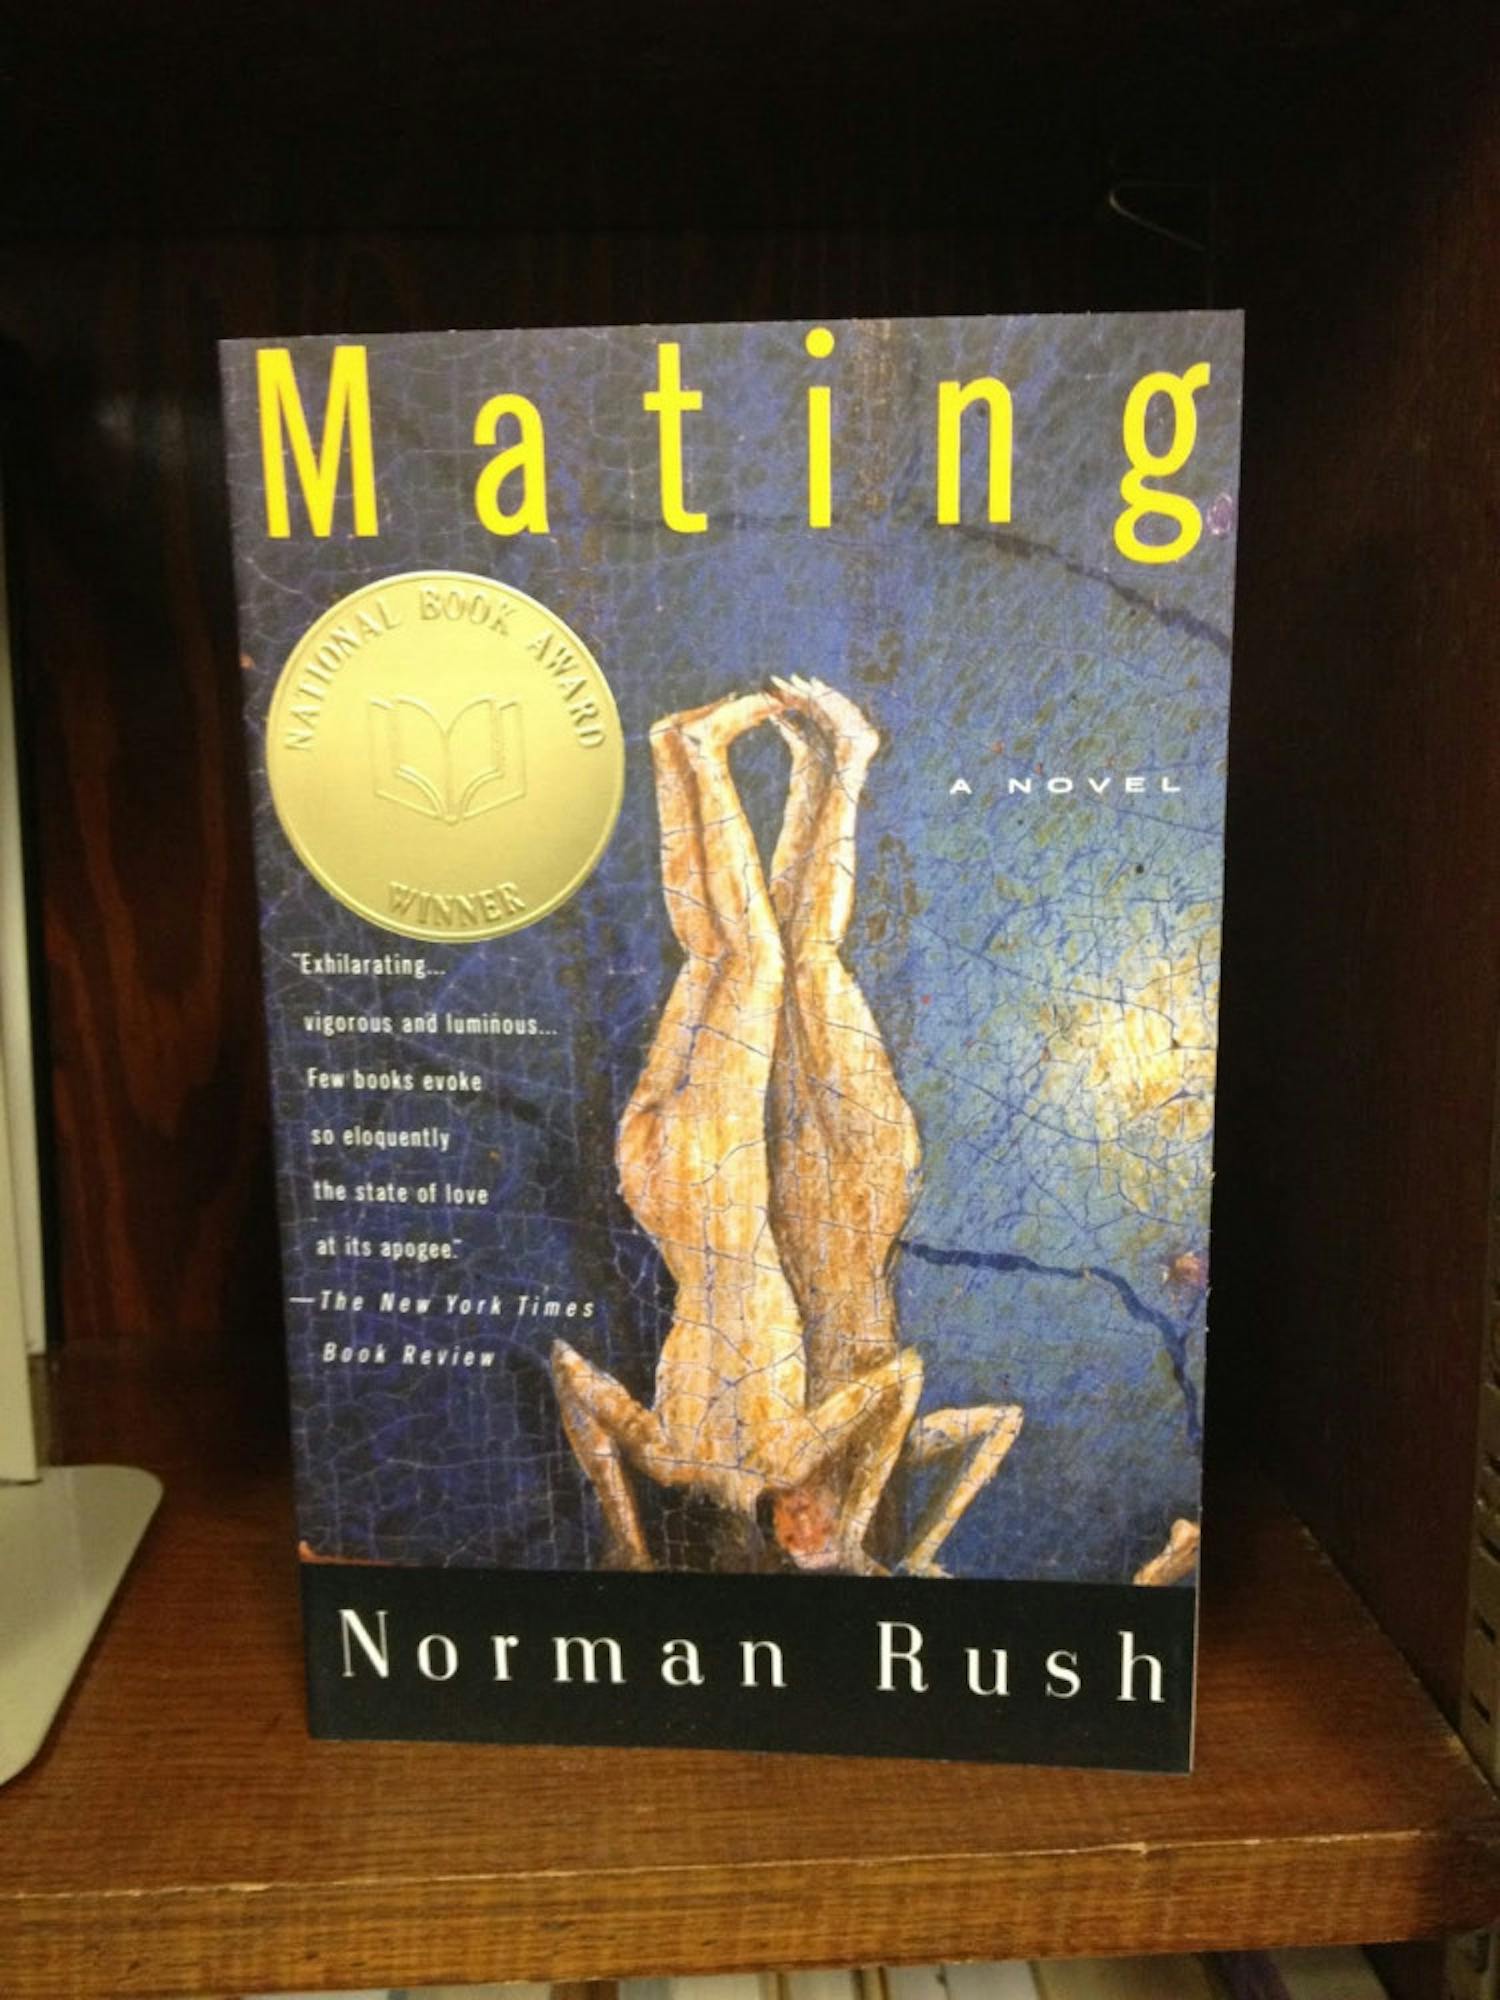 Mating, by Norman Rush
$3
For comparison, Barnes and Noble sells this book at $16.36; it’s in great condition.